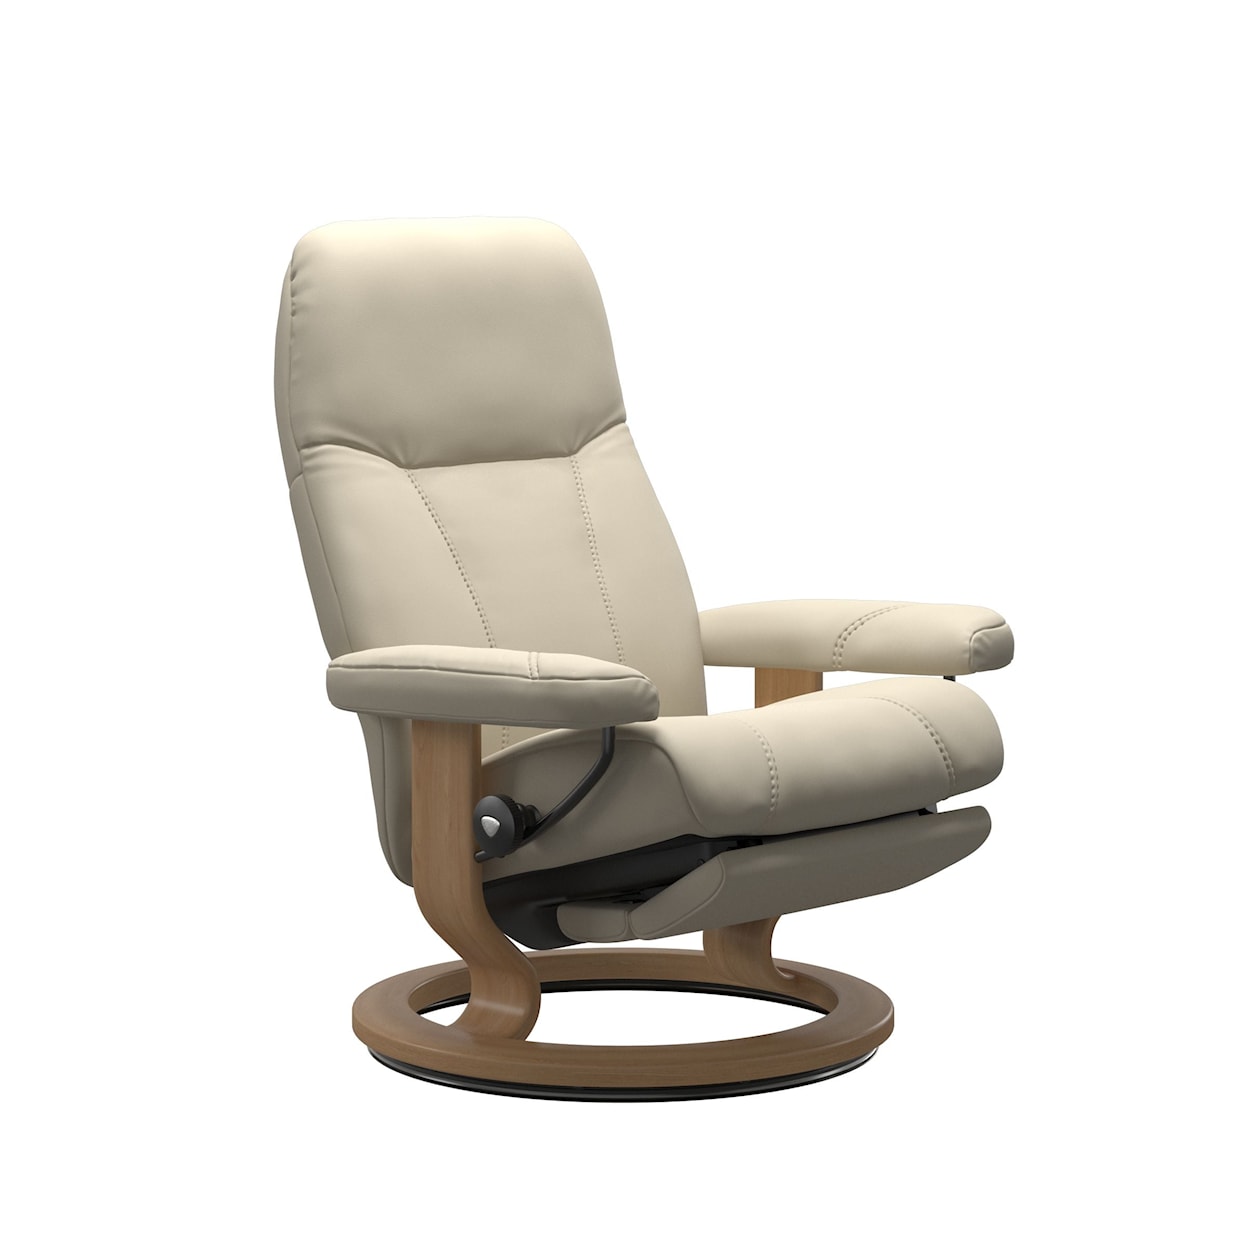 Stressless by Ekornes Consul Consul Large Power Recliner